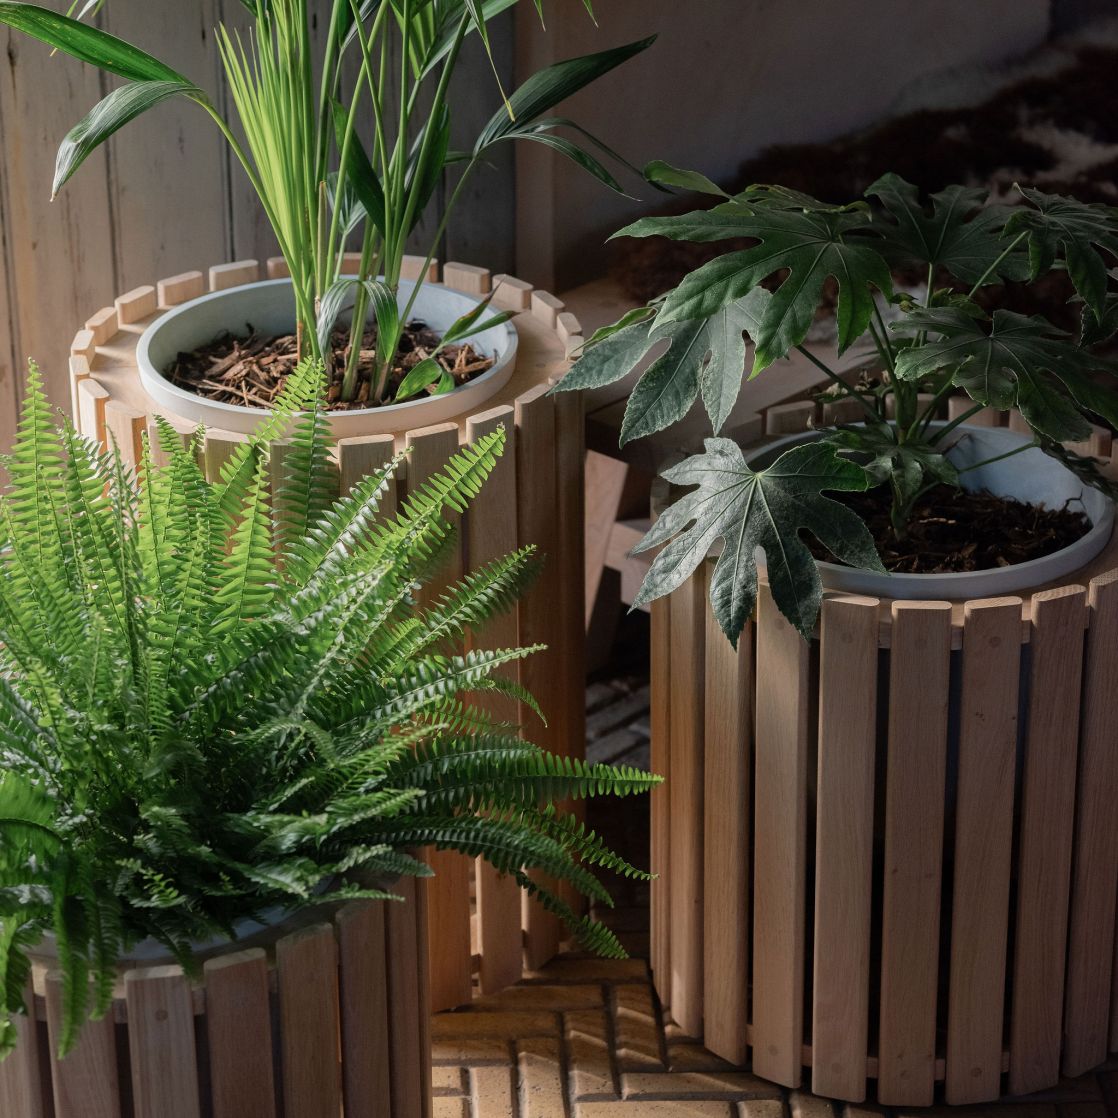 3 wooden planters on a tile floor